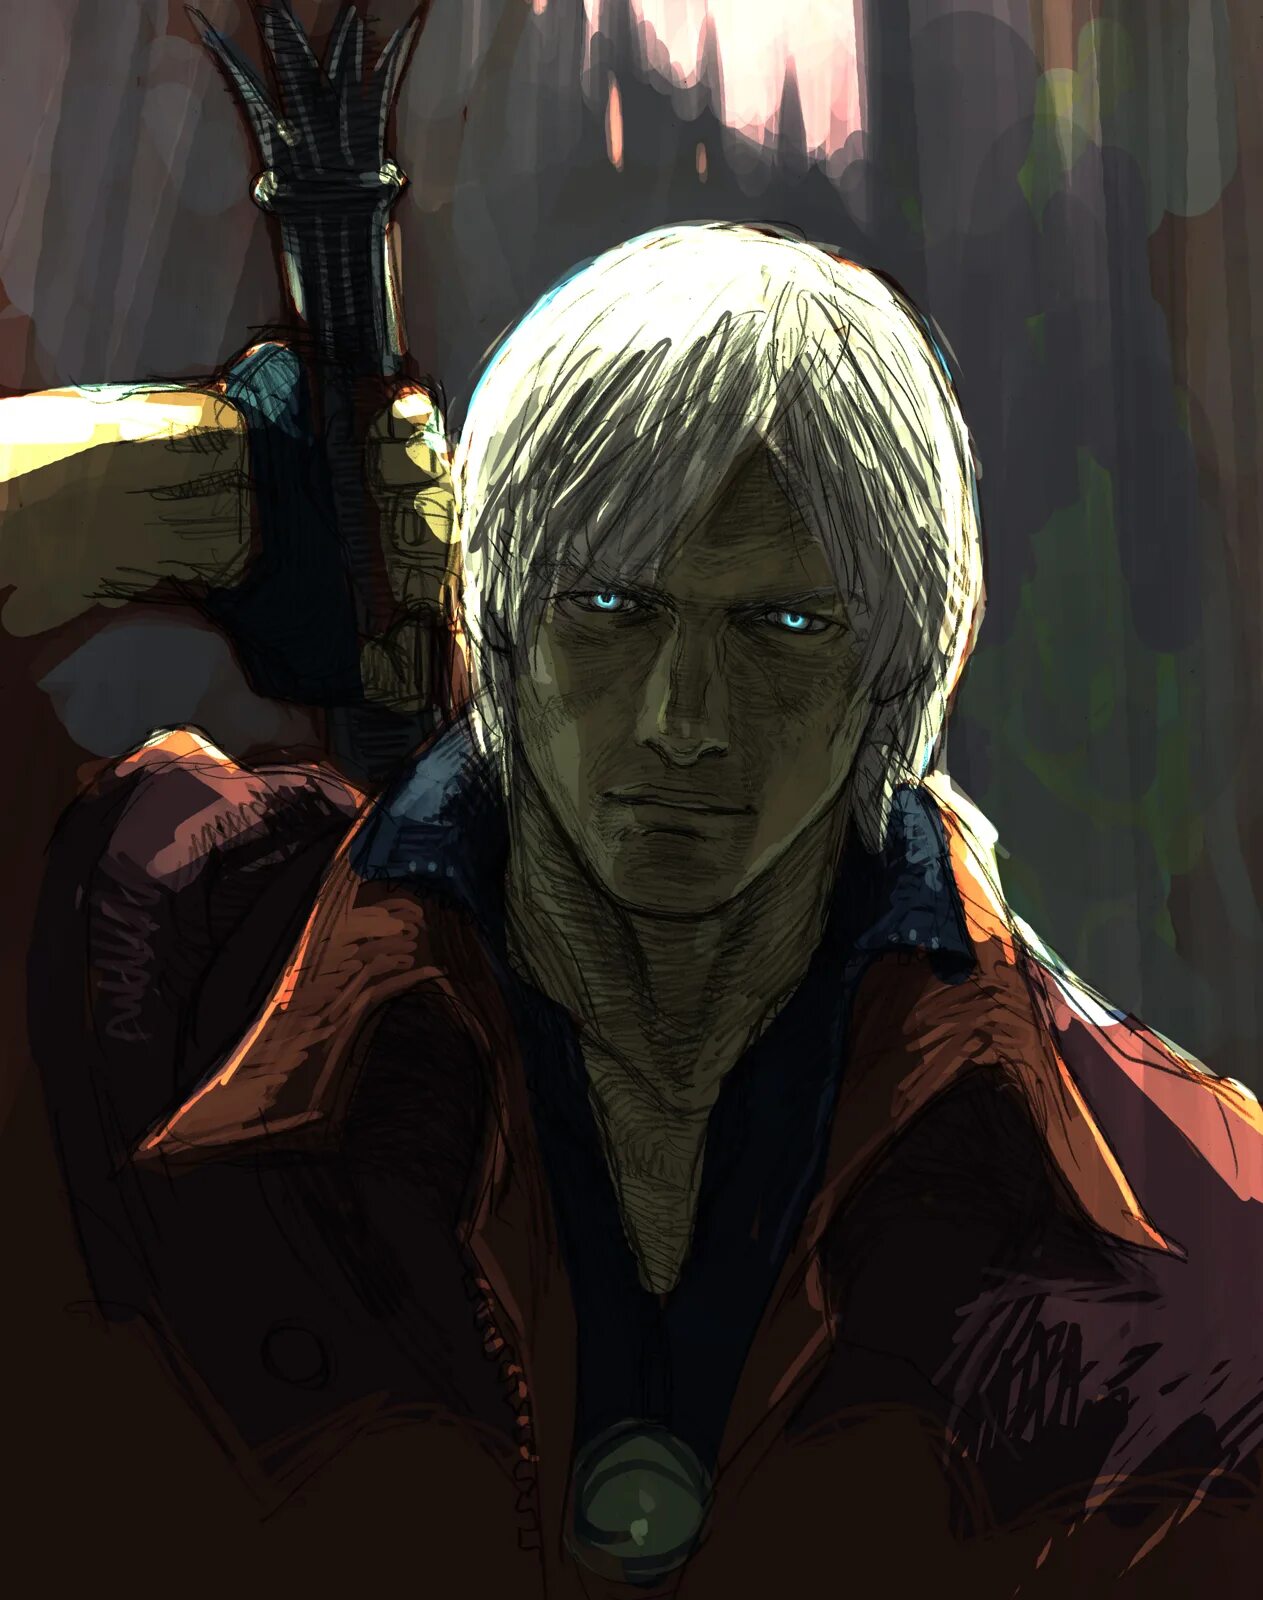 Данте Devil May Cry. Devil May Cry 4 Данте. Данте Devil May Cry 2013. Данте Devil May Cry 2. Dmc ава